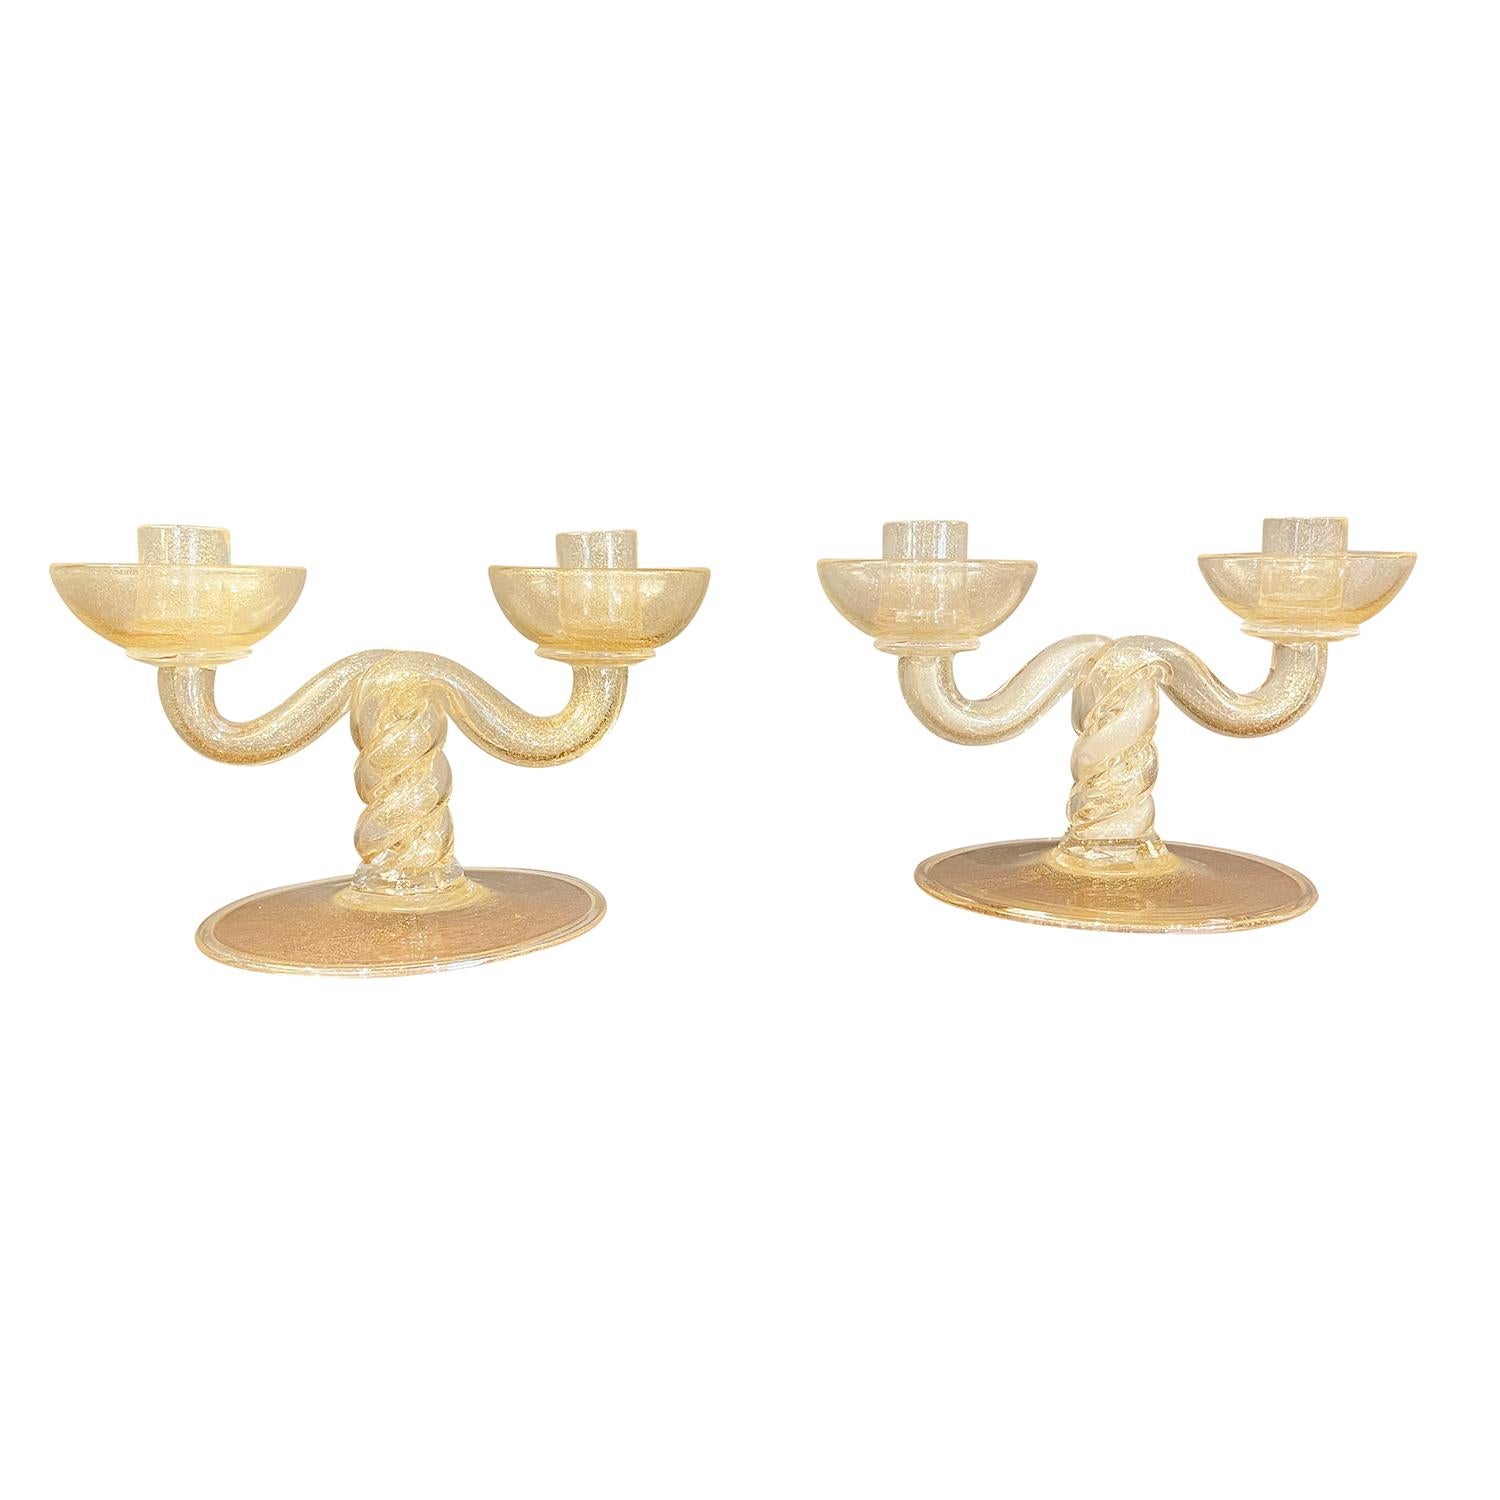 A vintage Mid-Century Modern Italian pair of candleholders made of hand blown Pulegoso Murano glass, designed and produced by Barovier & Toso, in good condition. Wear consistent with age and use, circa 1940-1950, Murano, Italy.

Base: 0.25